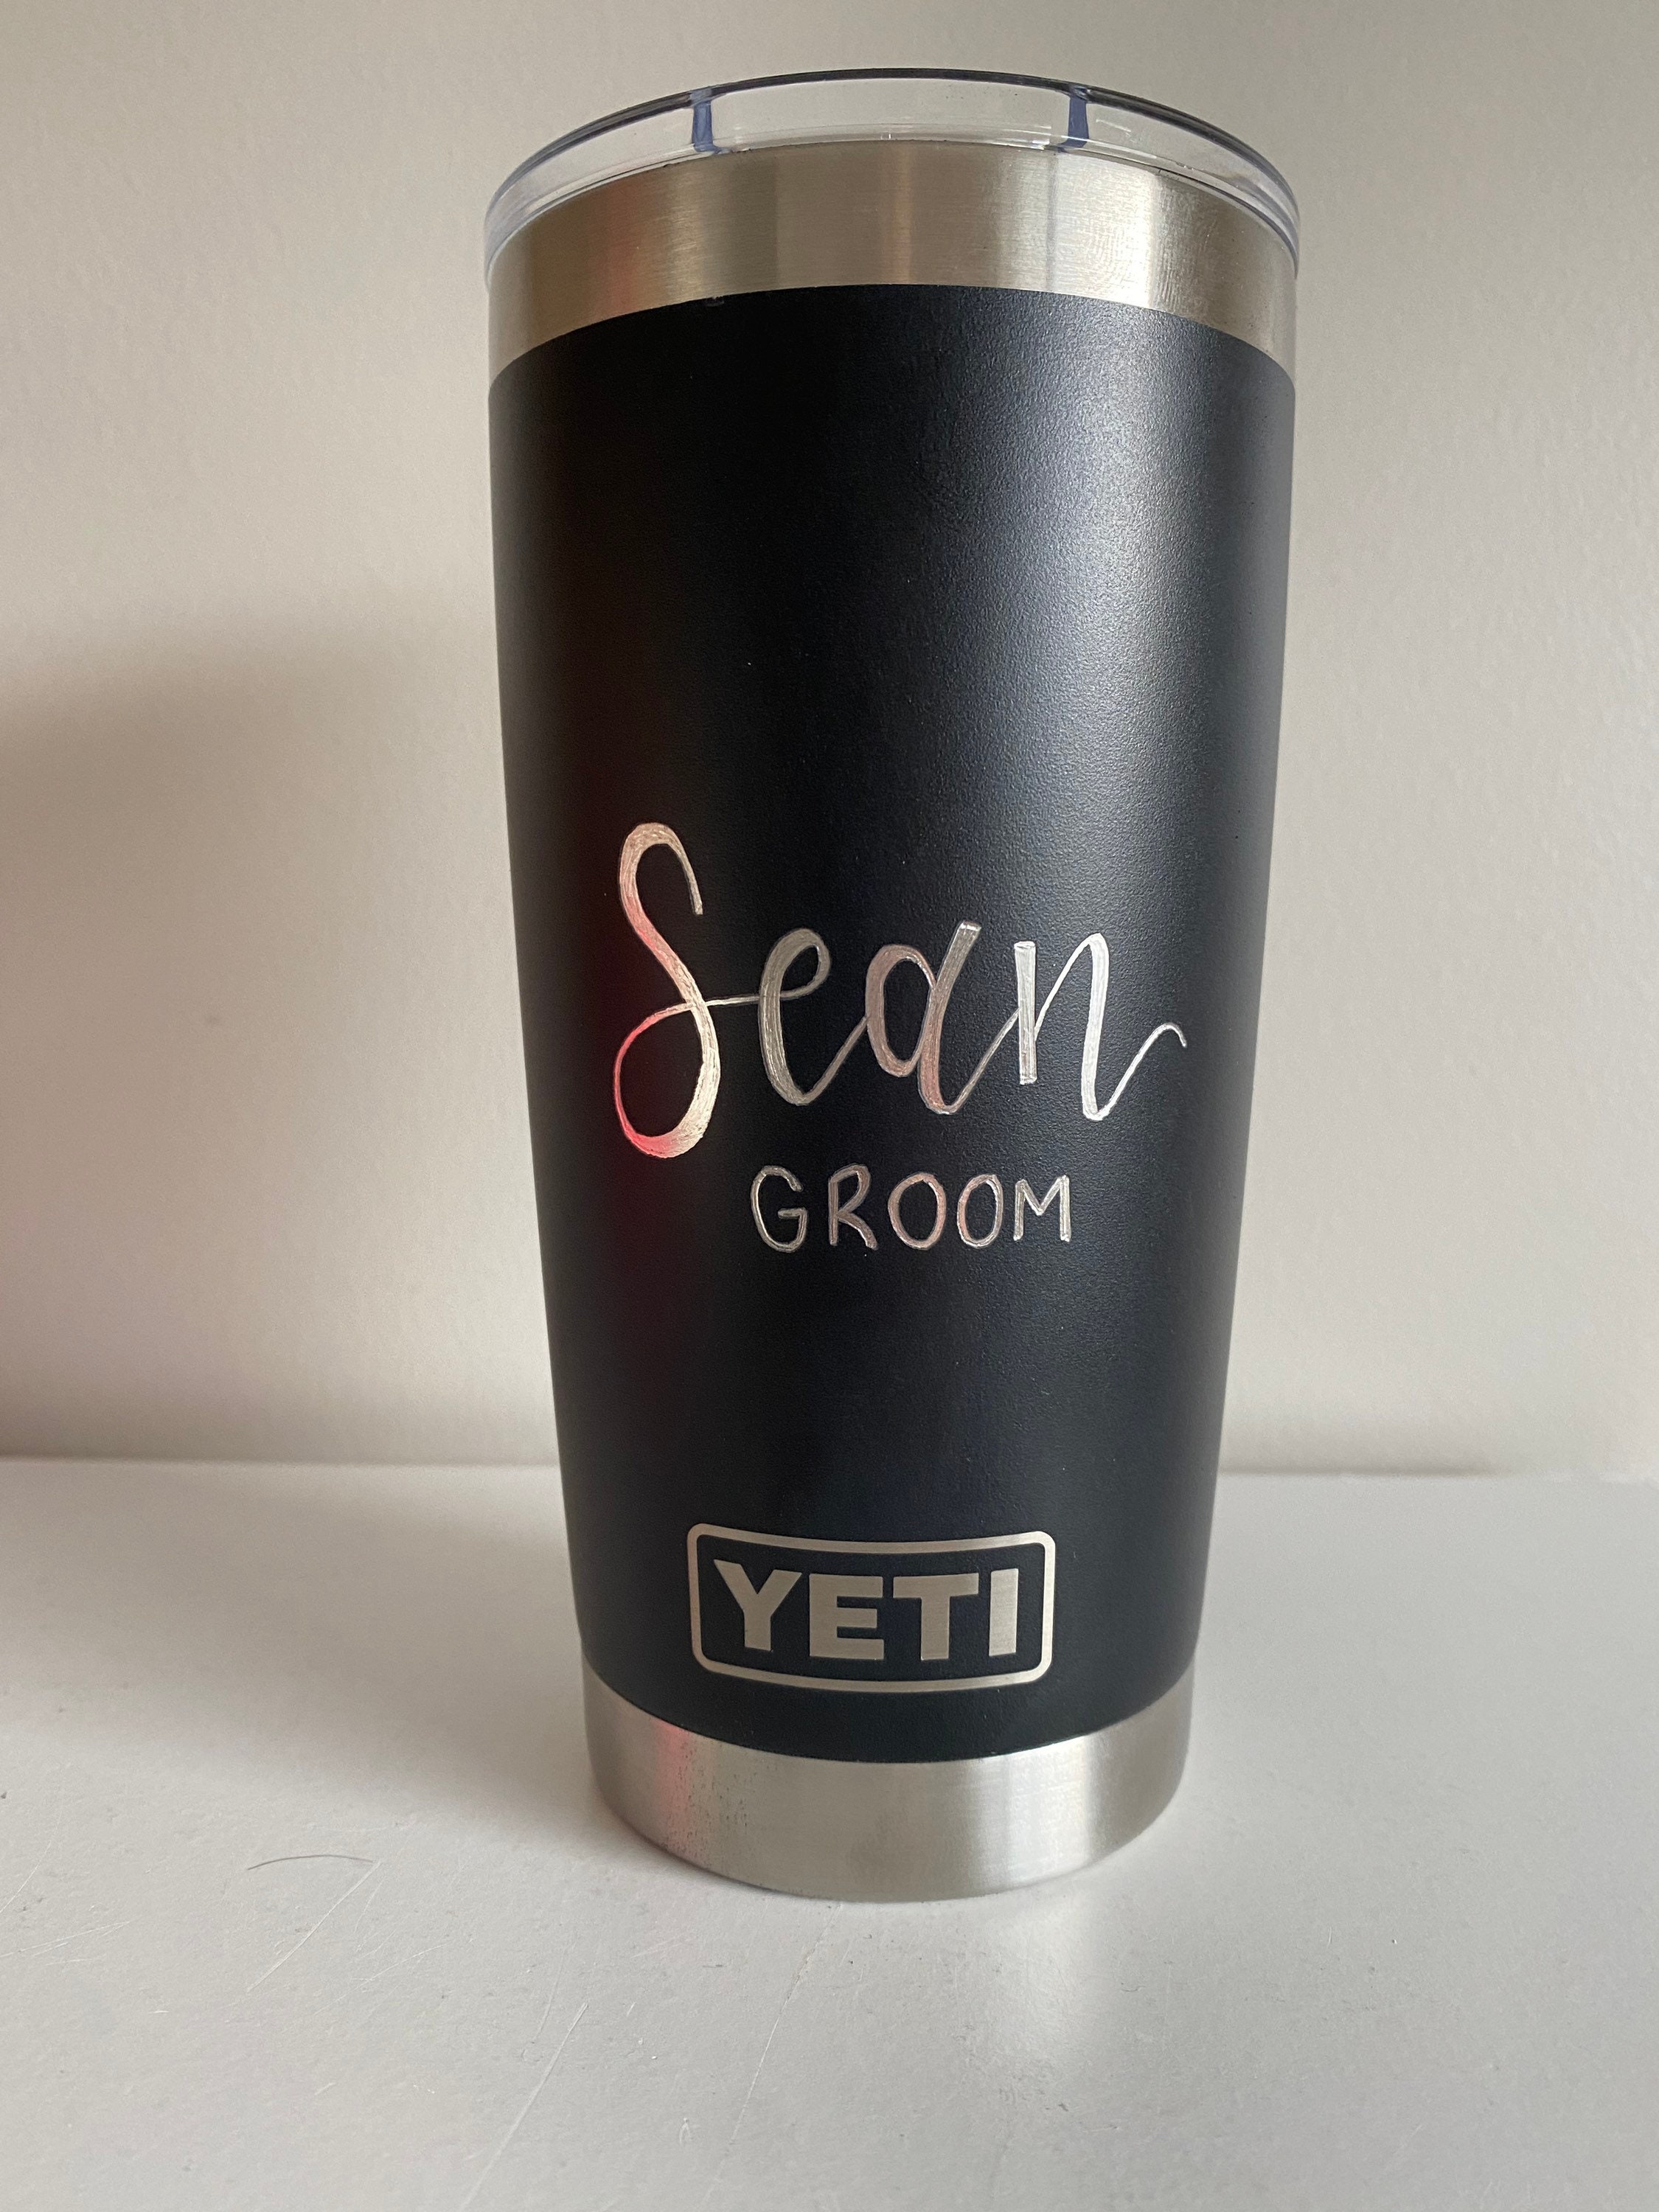 The Best Man for the Job is a Woman - Custom Engraved YETI Tumbler – Sunny  Box